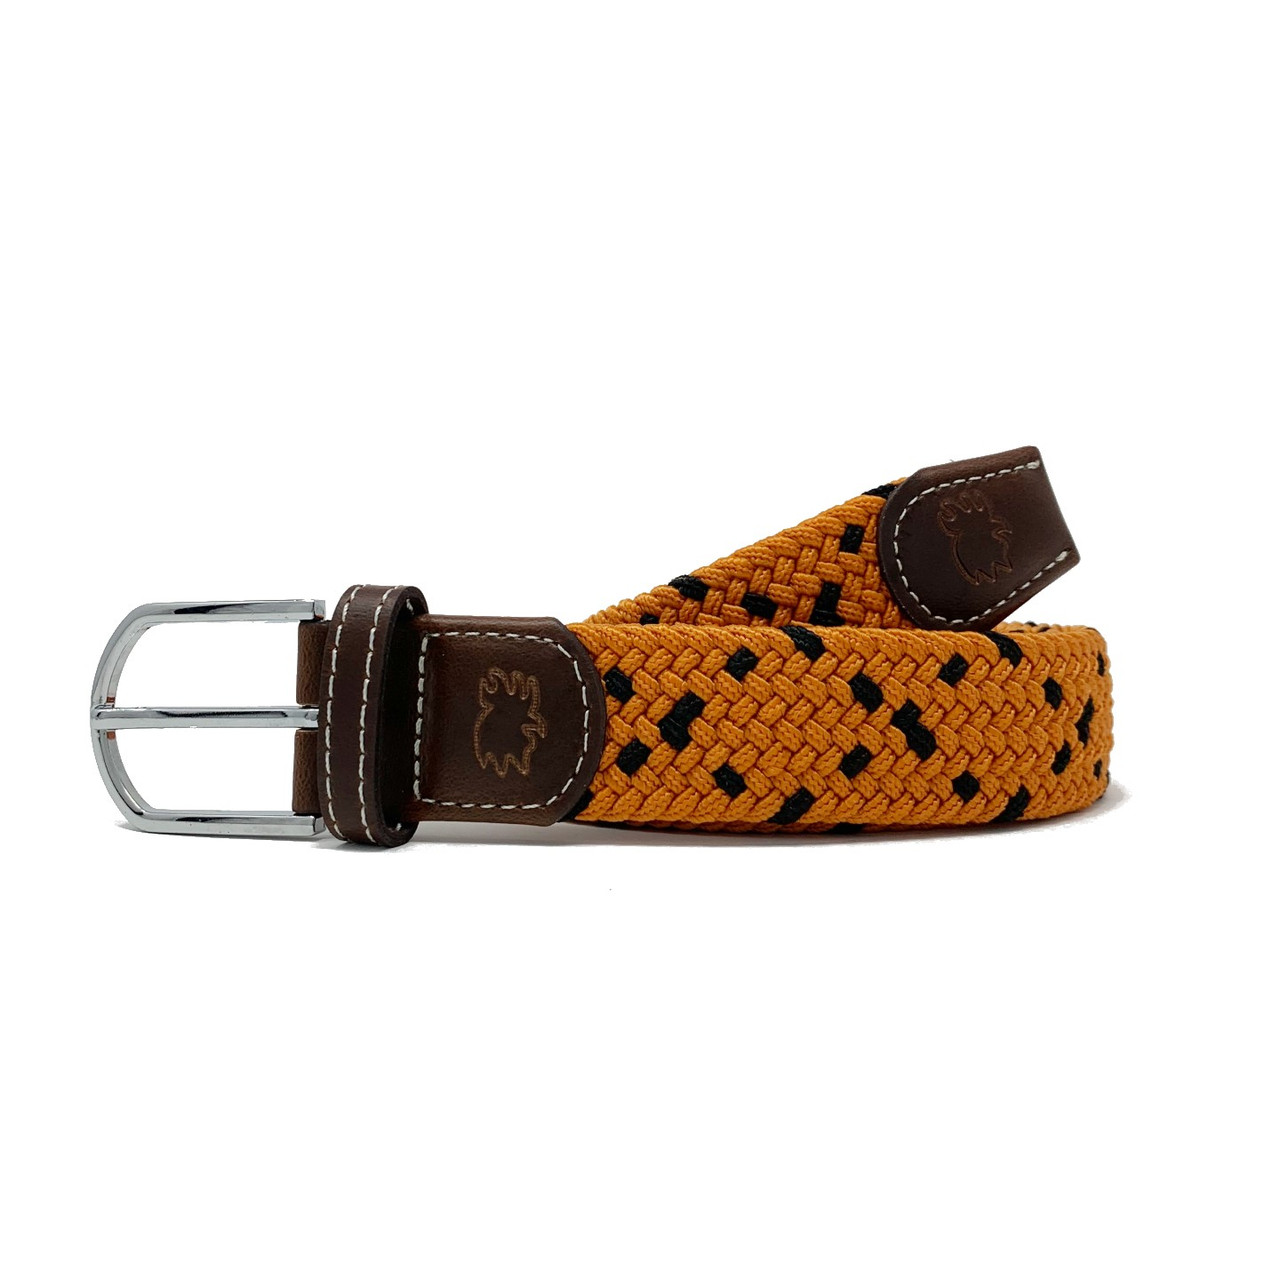 Lv Printed Belt Non Leather - Brown